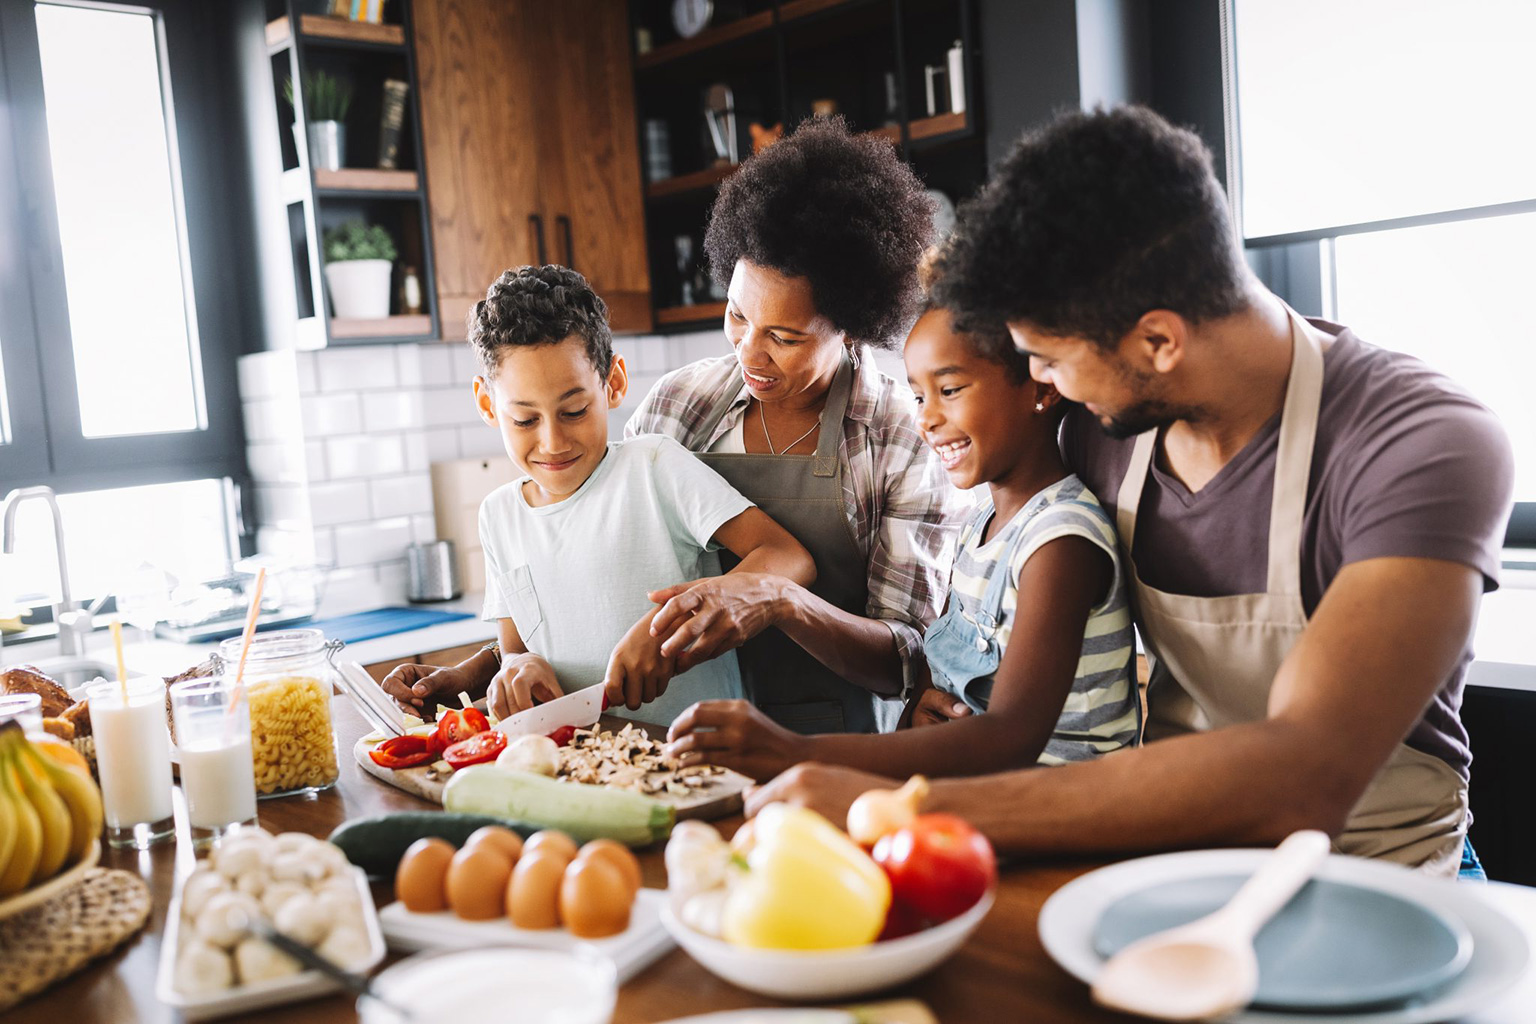 A family preparing a healthy meal together